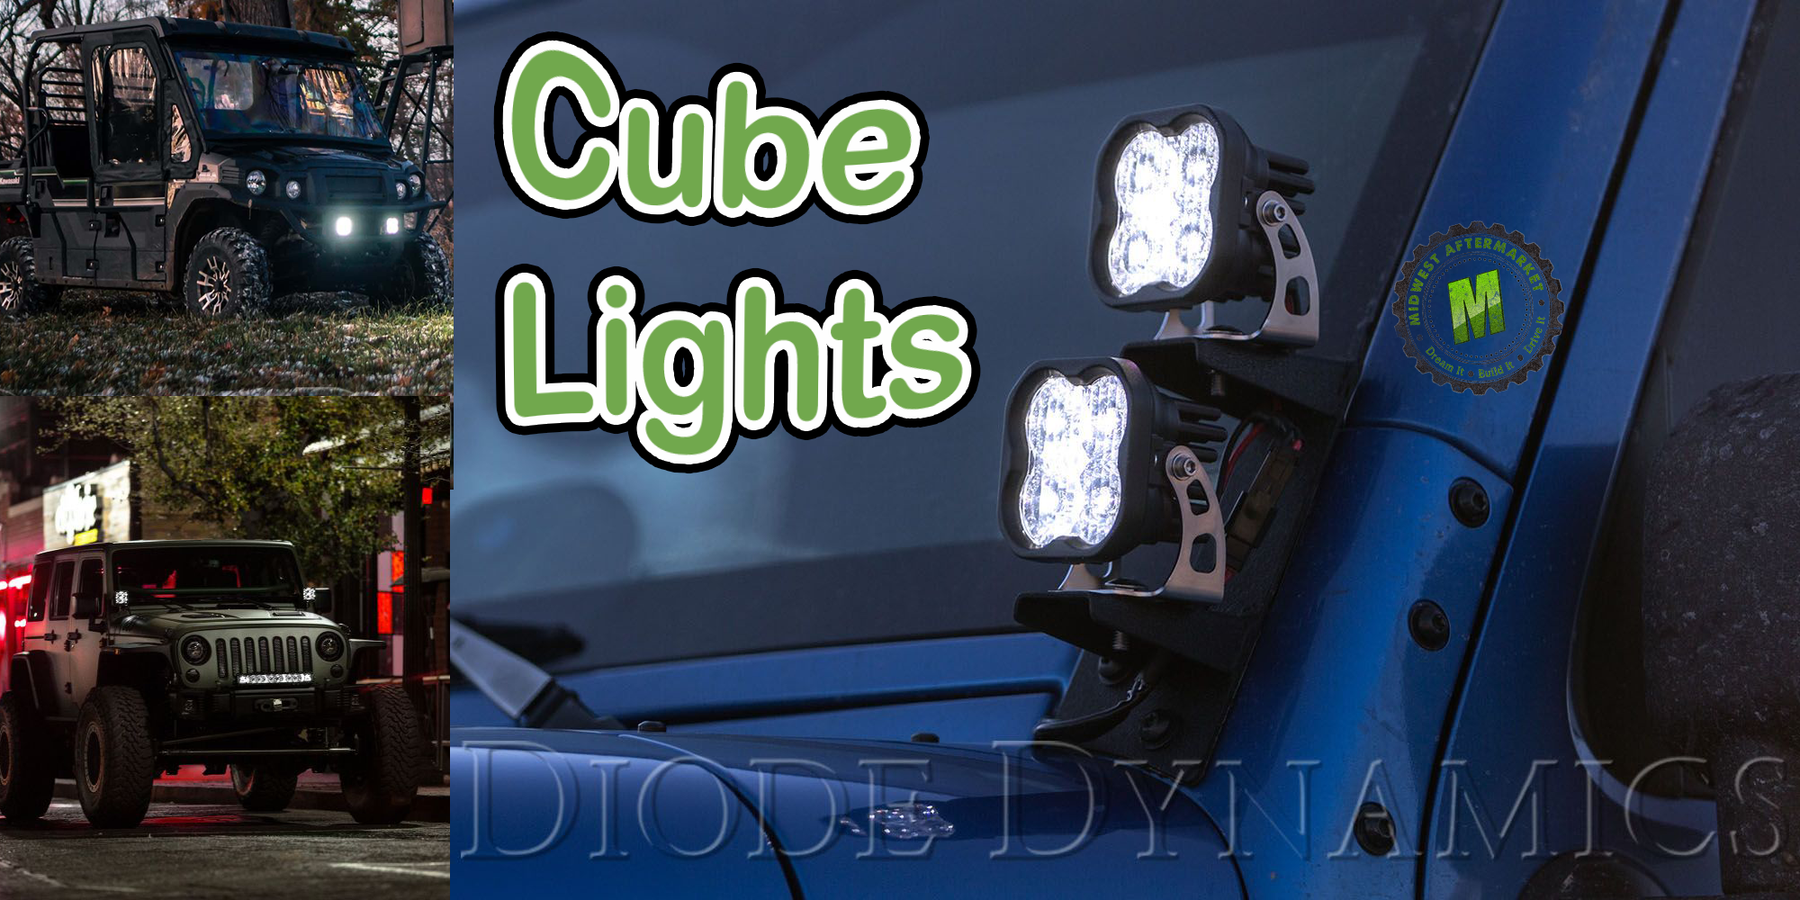 Cube and Pod Lights